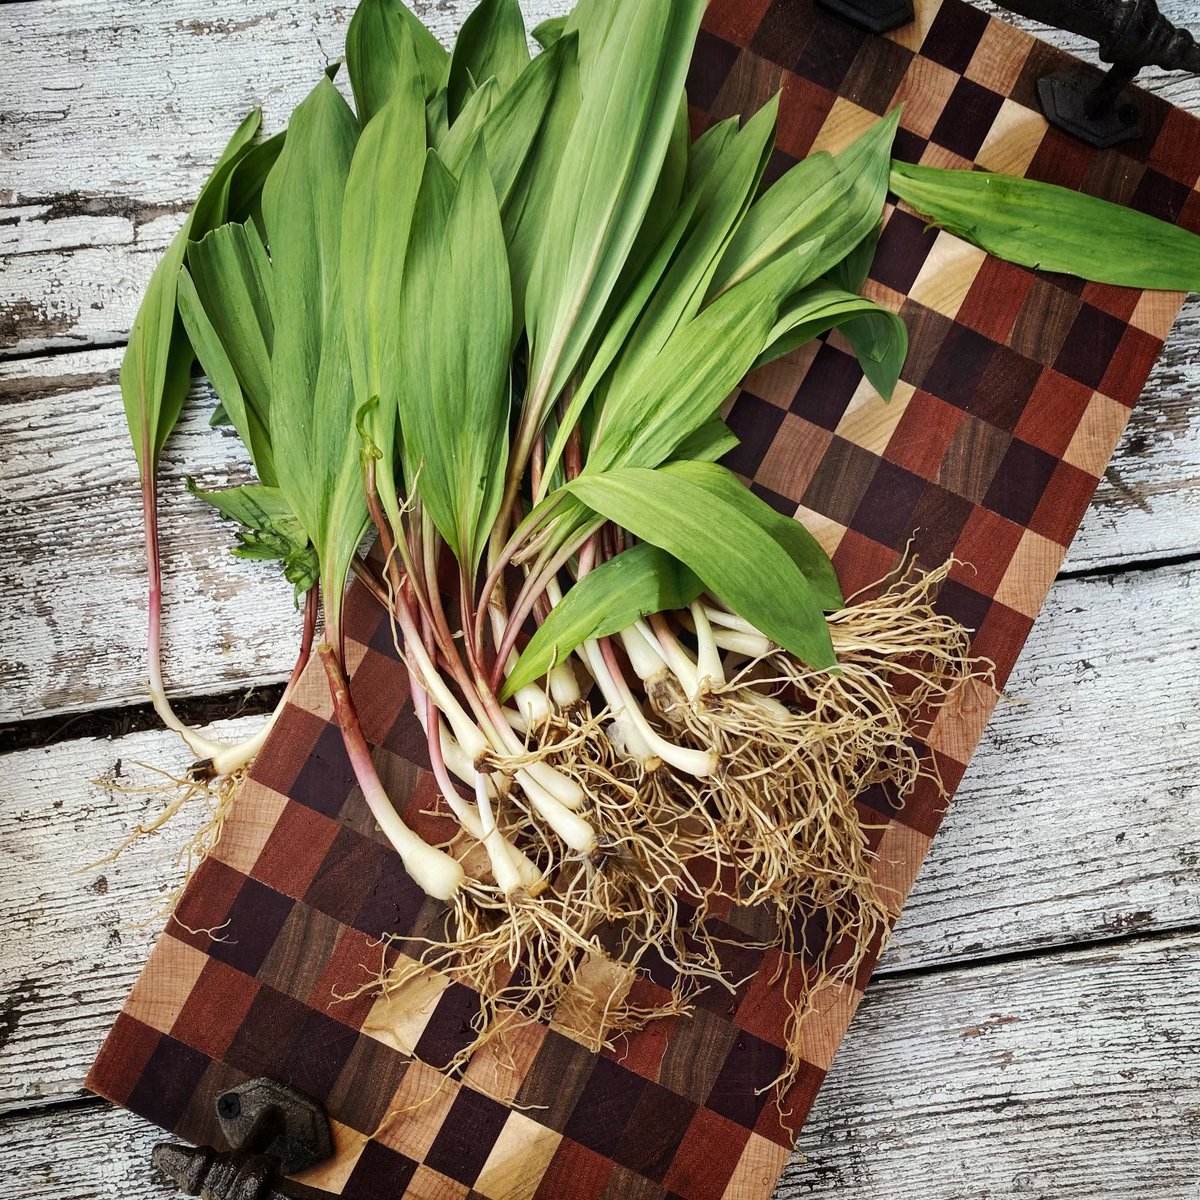 Ramps!! 🌱 A much coveted foraged delicacy amongst chefs and foodies alike. The season is short and it’s here! 🎉Sometimes called wild leeks, both the greens and white stalks are edible. 💚 #floralparkmarket